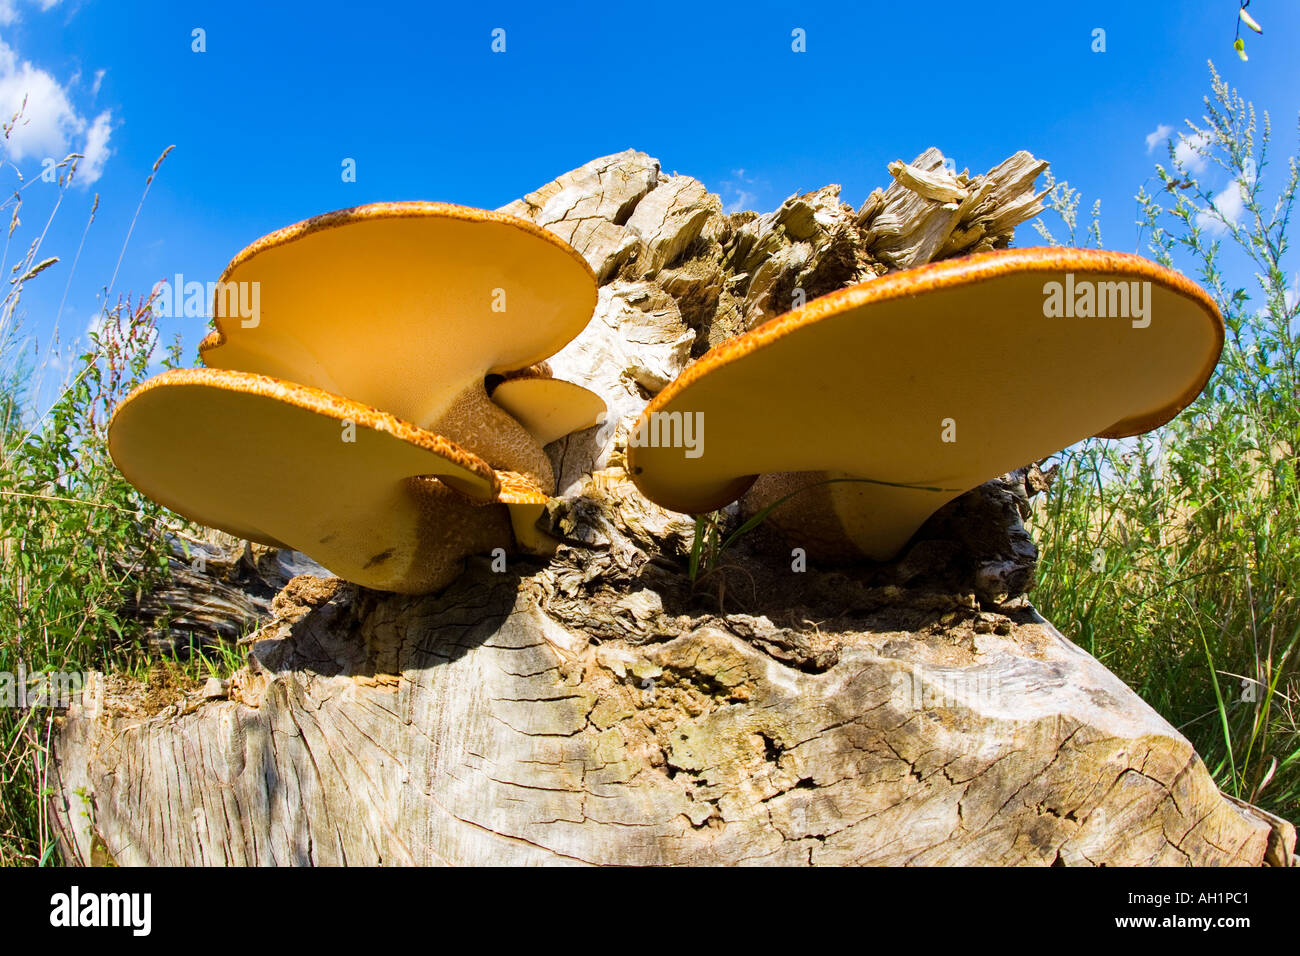 Dryad s Saddle Polyporus squamosus growing on old willow trung with blue sky background potton bedfordshire Stock Photo